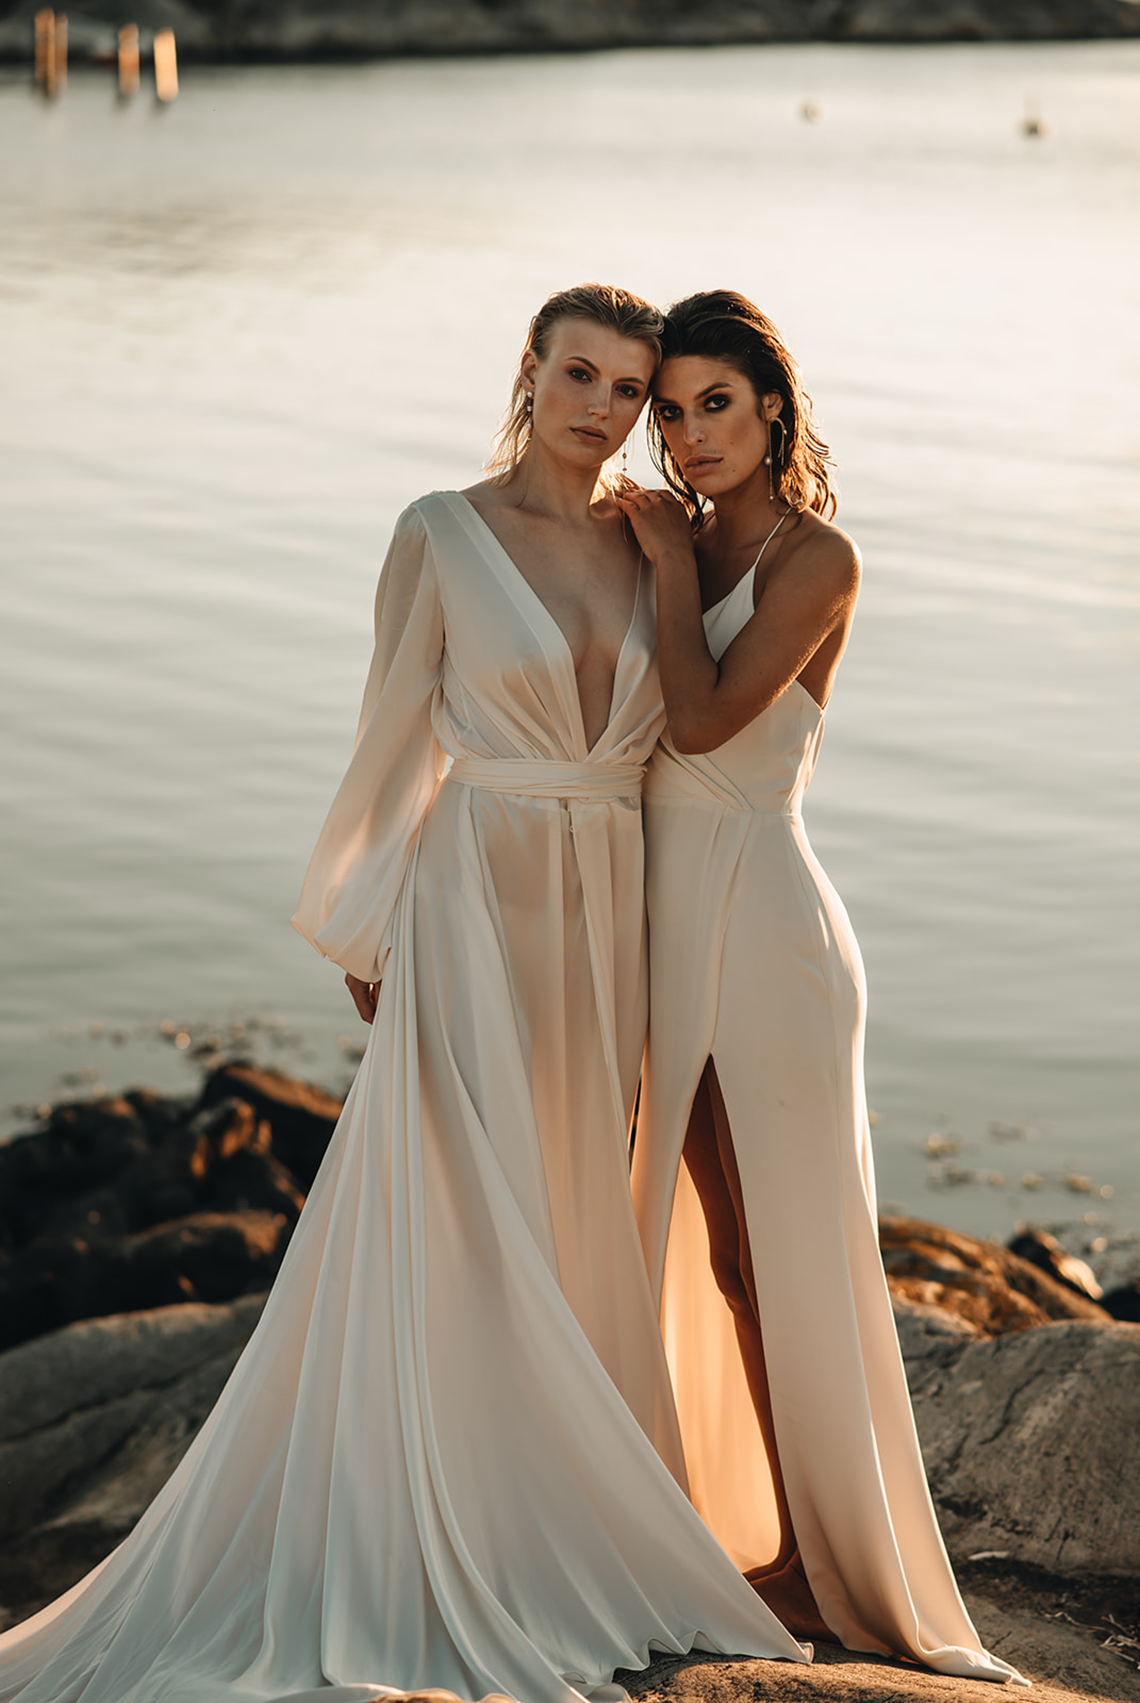 Wild at Heart Bridal and The Dress Tribe are Opening a Bridal Pop Up in Sweden – Jeroen Noordzij Photography